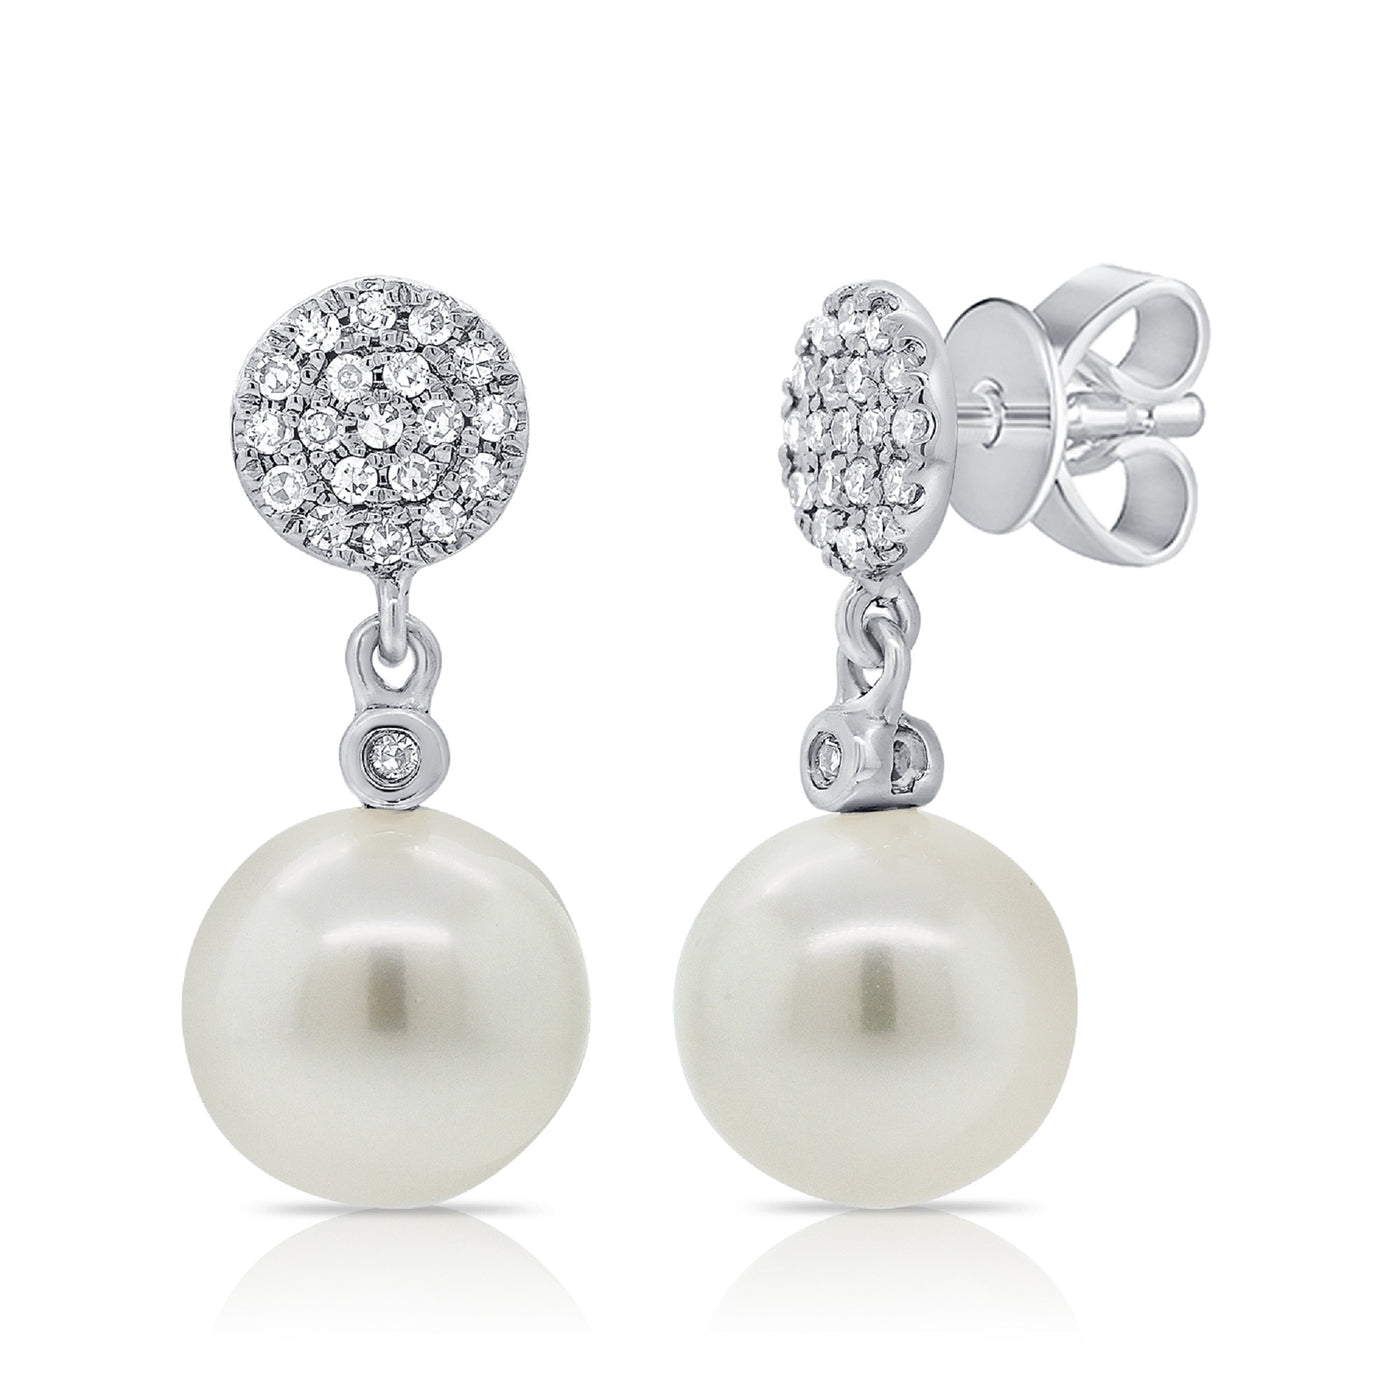 White Gold Drop Diamond and Pearl Earrings  SE700148W